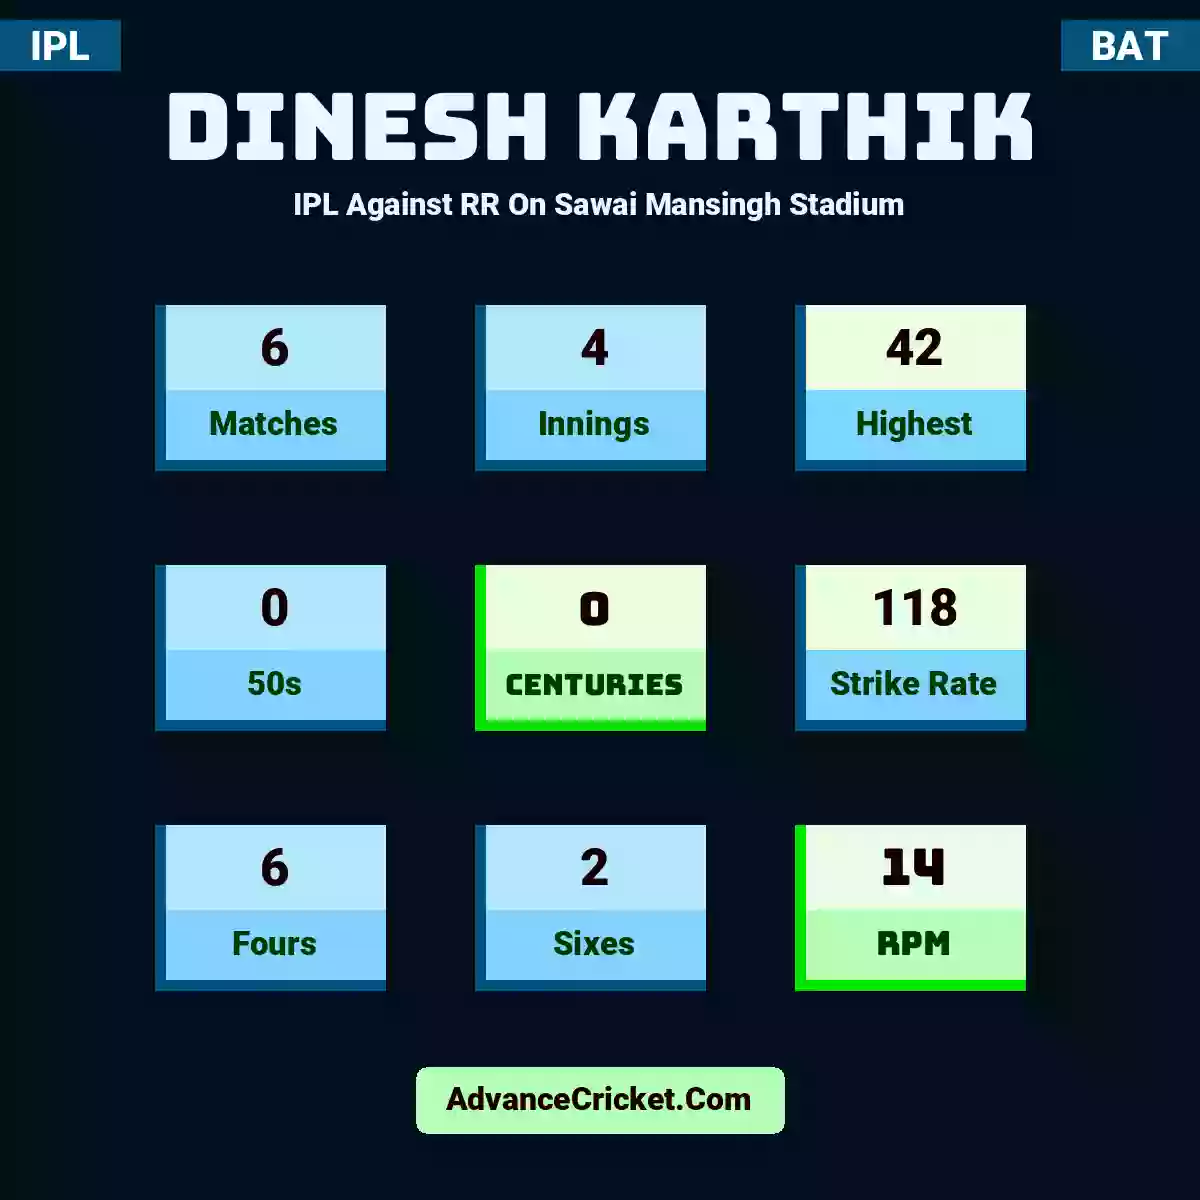 Dinesh Karthik IPL  Against RR On Sawai Mansingh Stadium, Dinesh Karthik played 6 matches, scored 42 runs as highest, 0 half-centuries, and 0 centuries, with a strike rate of 118. D.Karthik hit 6 fours and 2 sixes, with an RPM of 14.